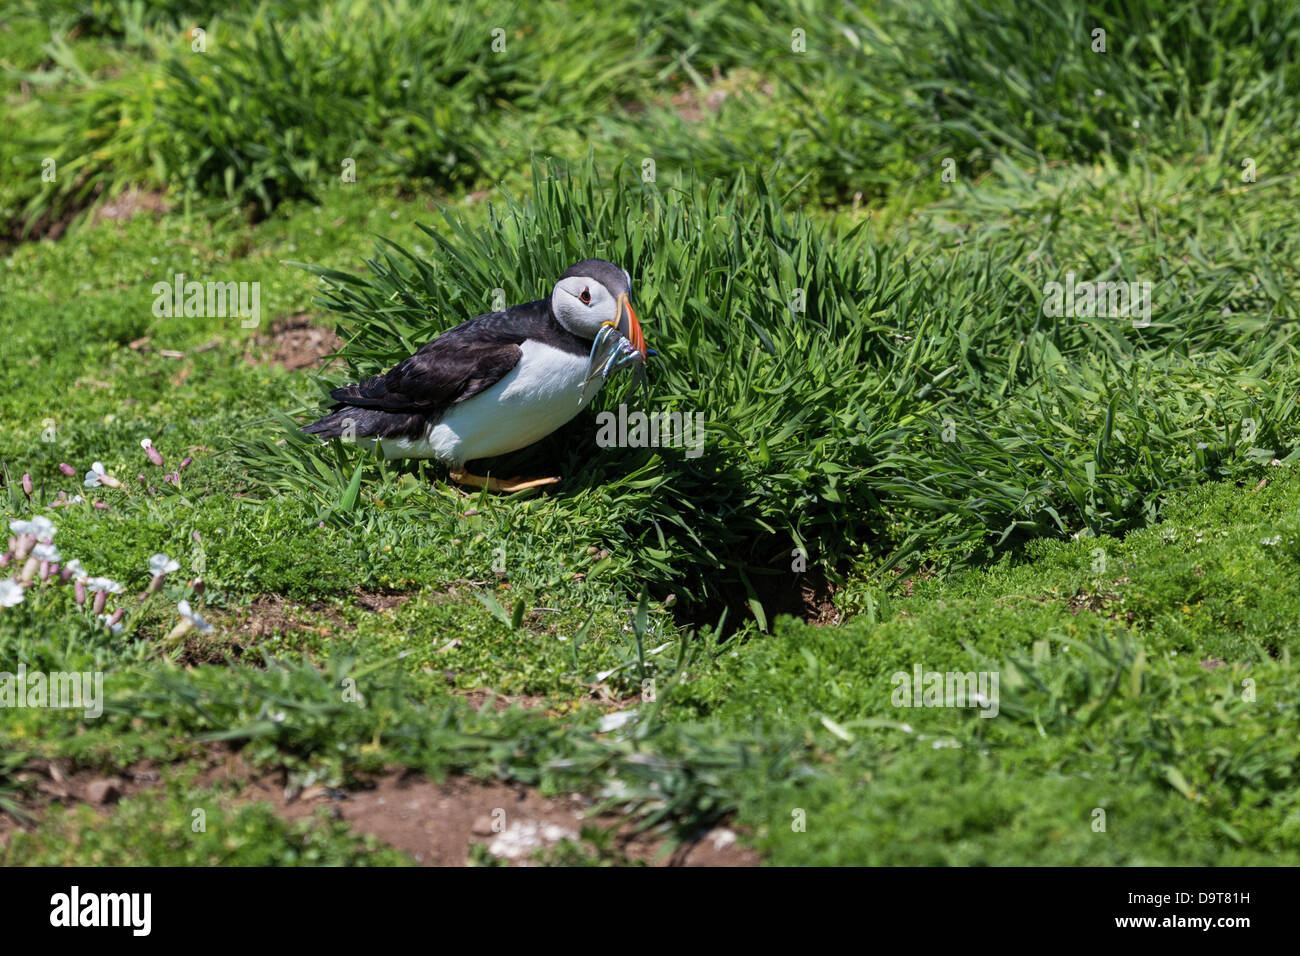 A puffin about to enter the nest burrow with sand eels in its beak Stock Photo